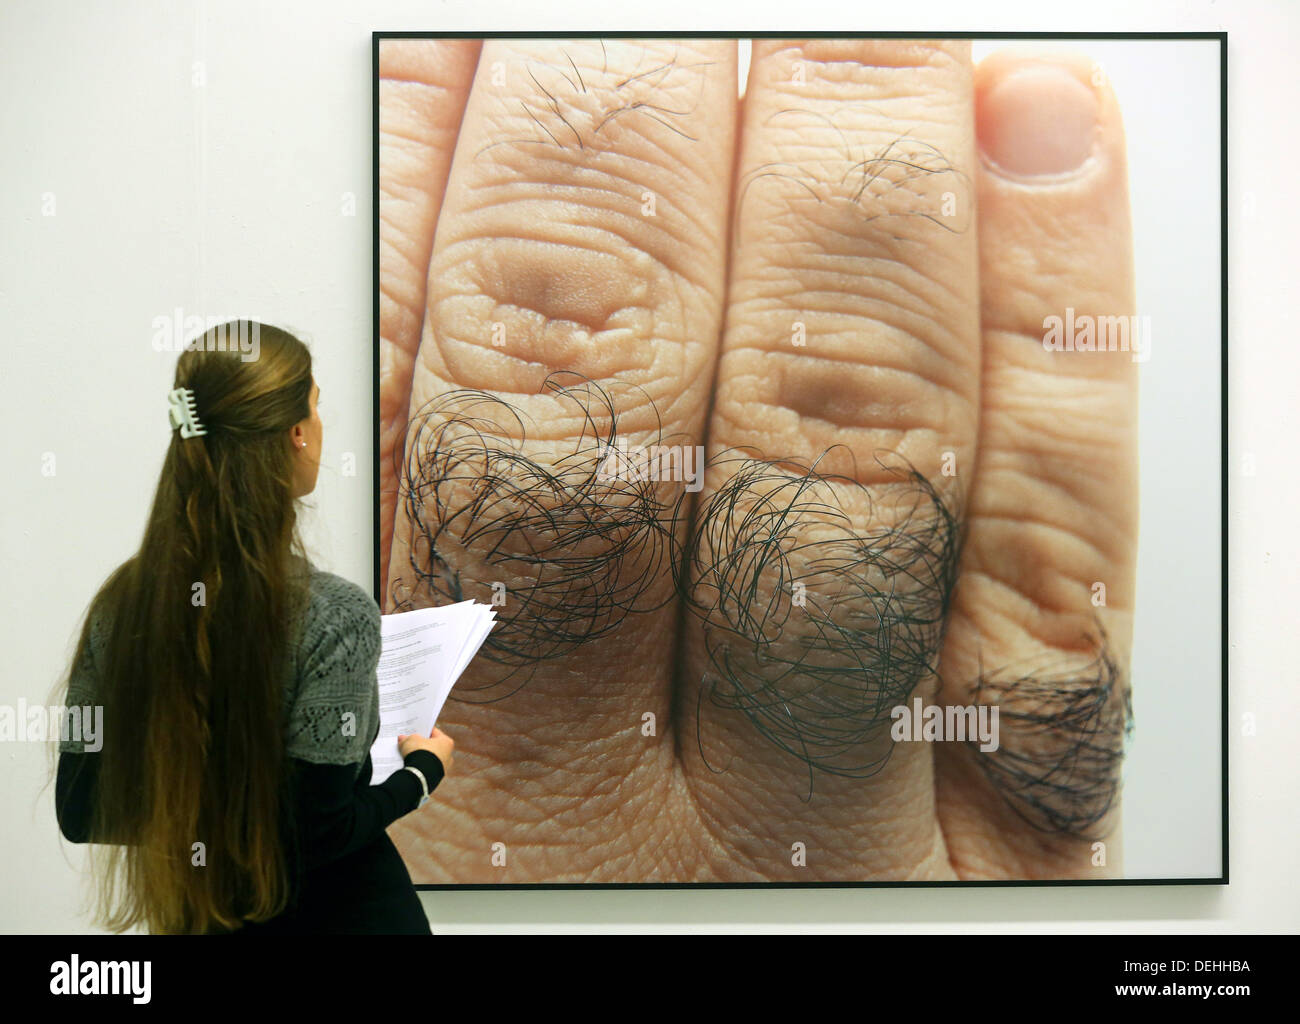 The photo of a hairy hand by Herlinde Koelbl is on display in Ludwiggalerie at Schloss Oberhausen in Oberhausen, Germany, 19 September 2013. The exhibition 'Hair! Hair in Art' is open from 22 September 2013 until 12 December 2014. Photo: ROLAND WEIHRAUCH Stock Photo